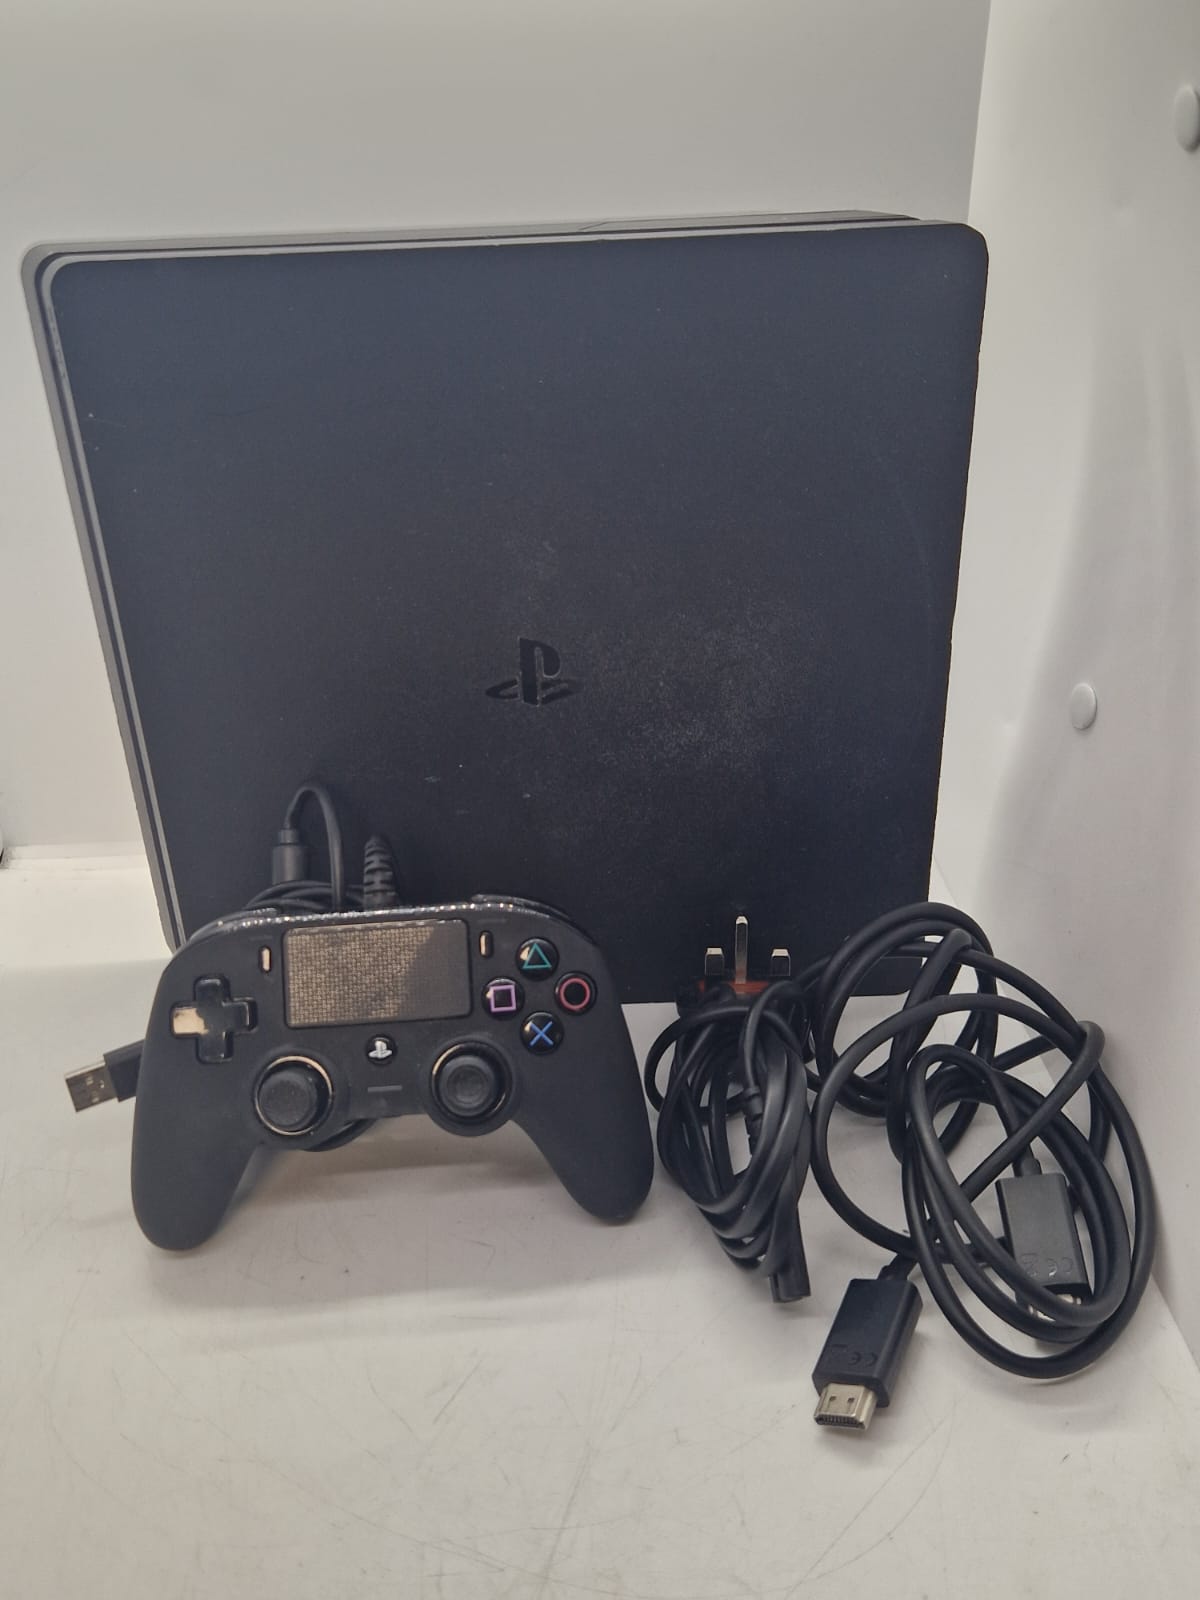 Sony PlayStation 4 Slim 500GB Home Console - Jet Black With a Wired Controller